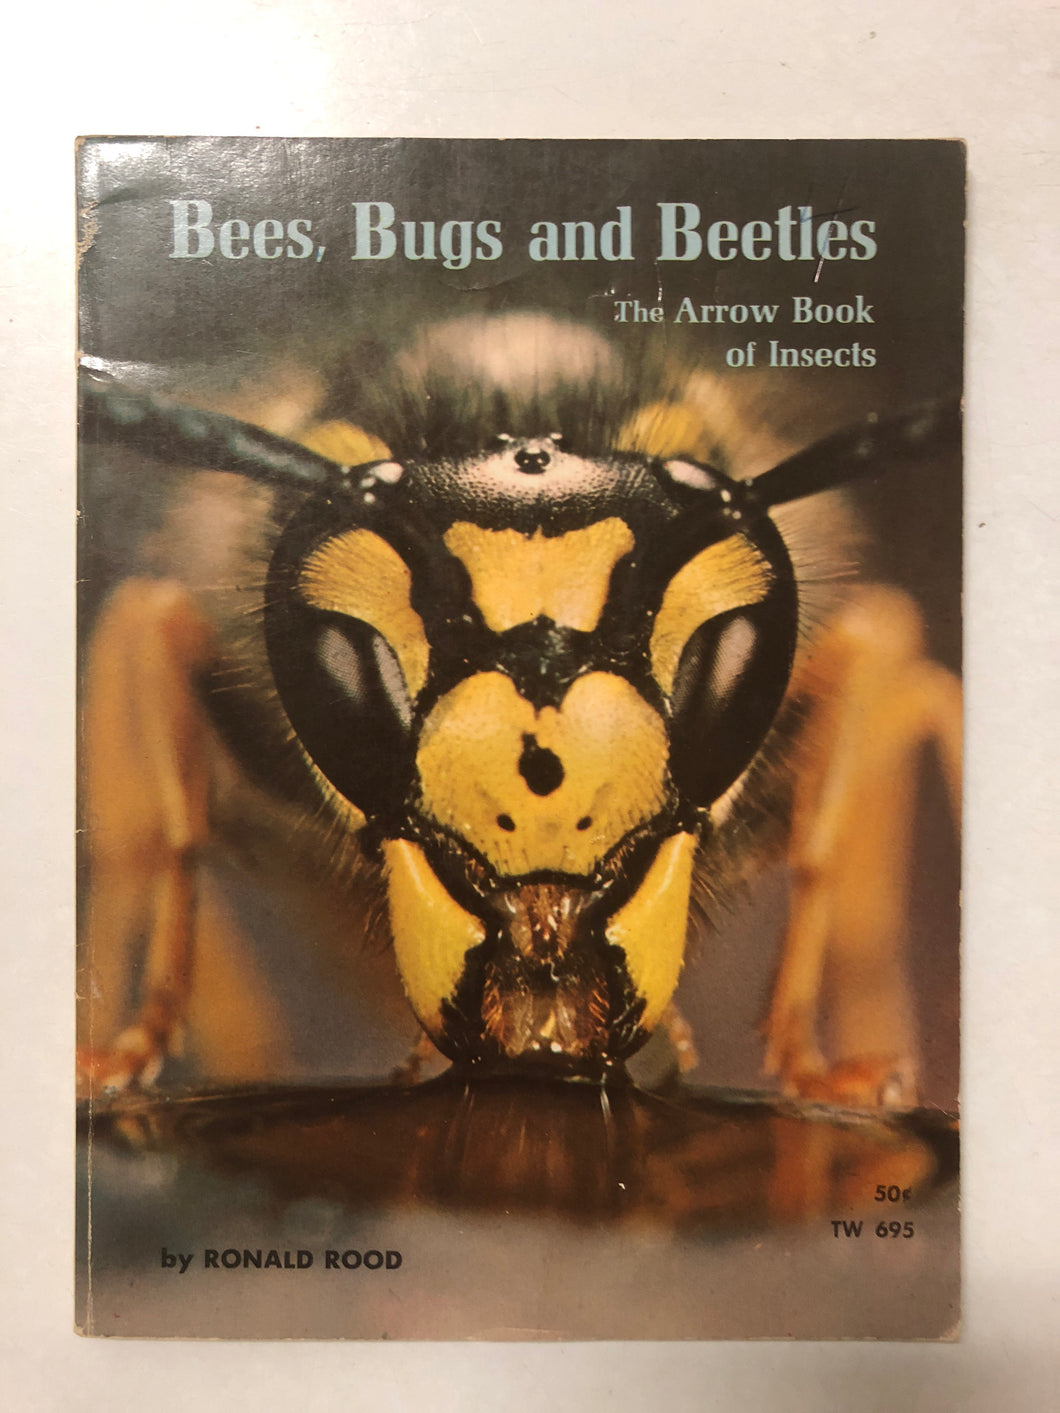 Bees, Bugs and Beetles - Slick Cat Books 